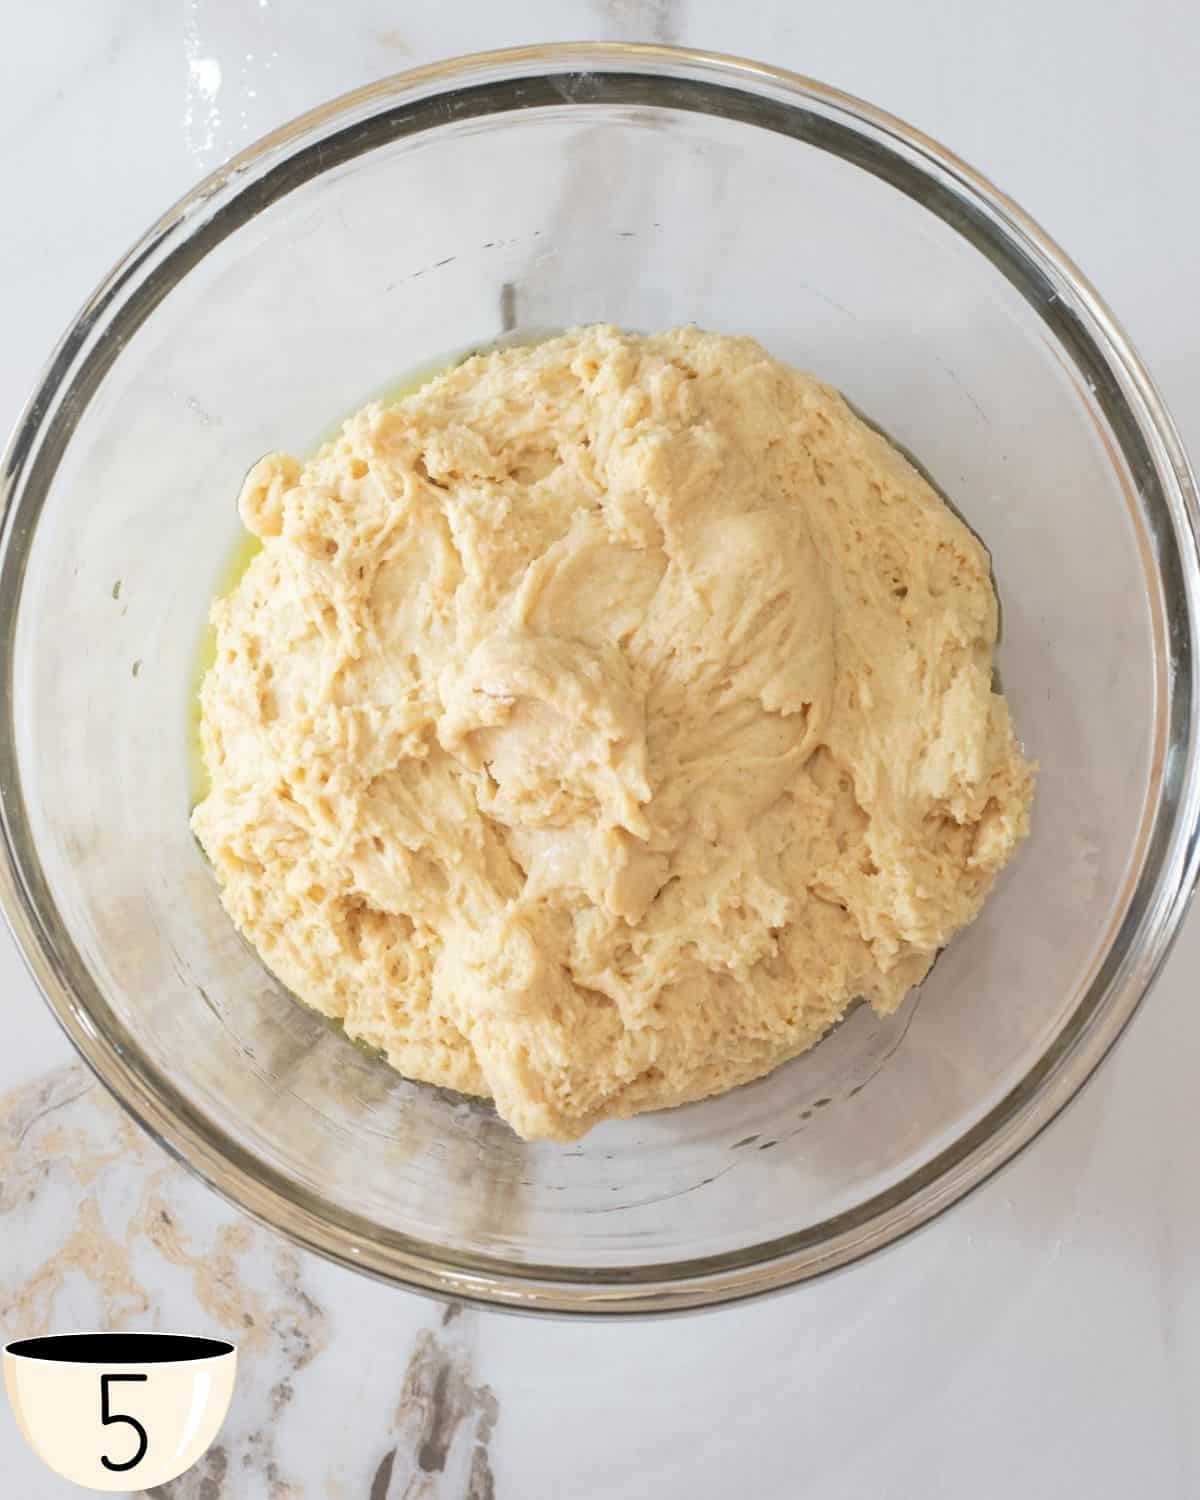 Dough in a bowl after initial mixing, with a smooth top surface, indicating readiness for the rising process in gluten-free bagel making.